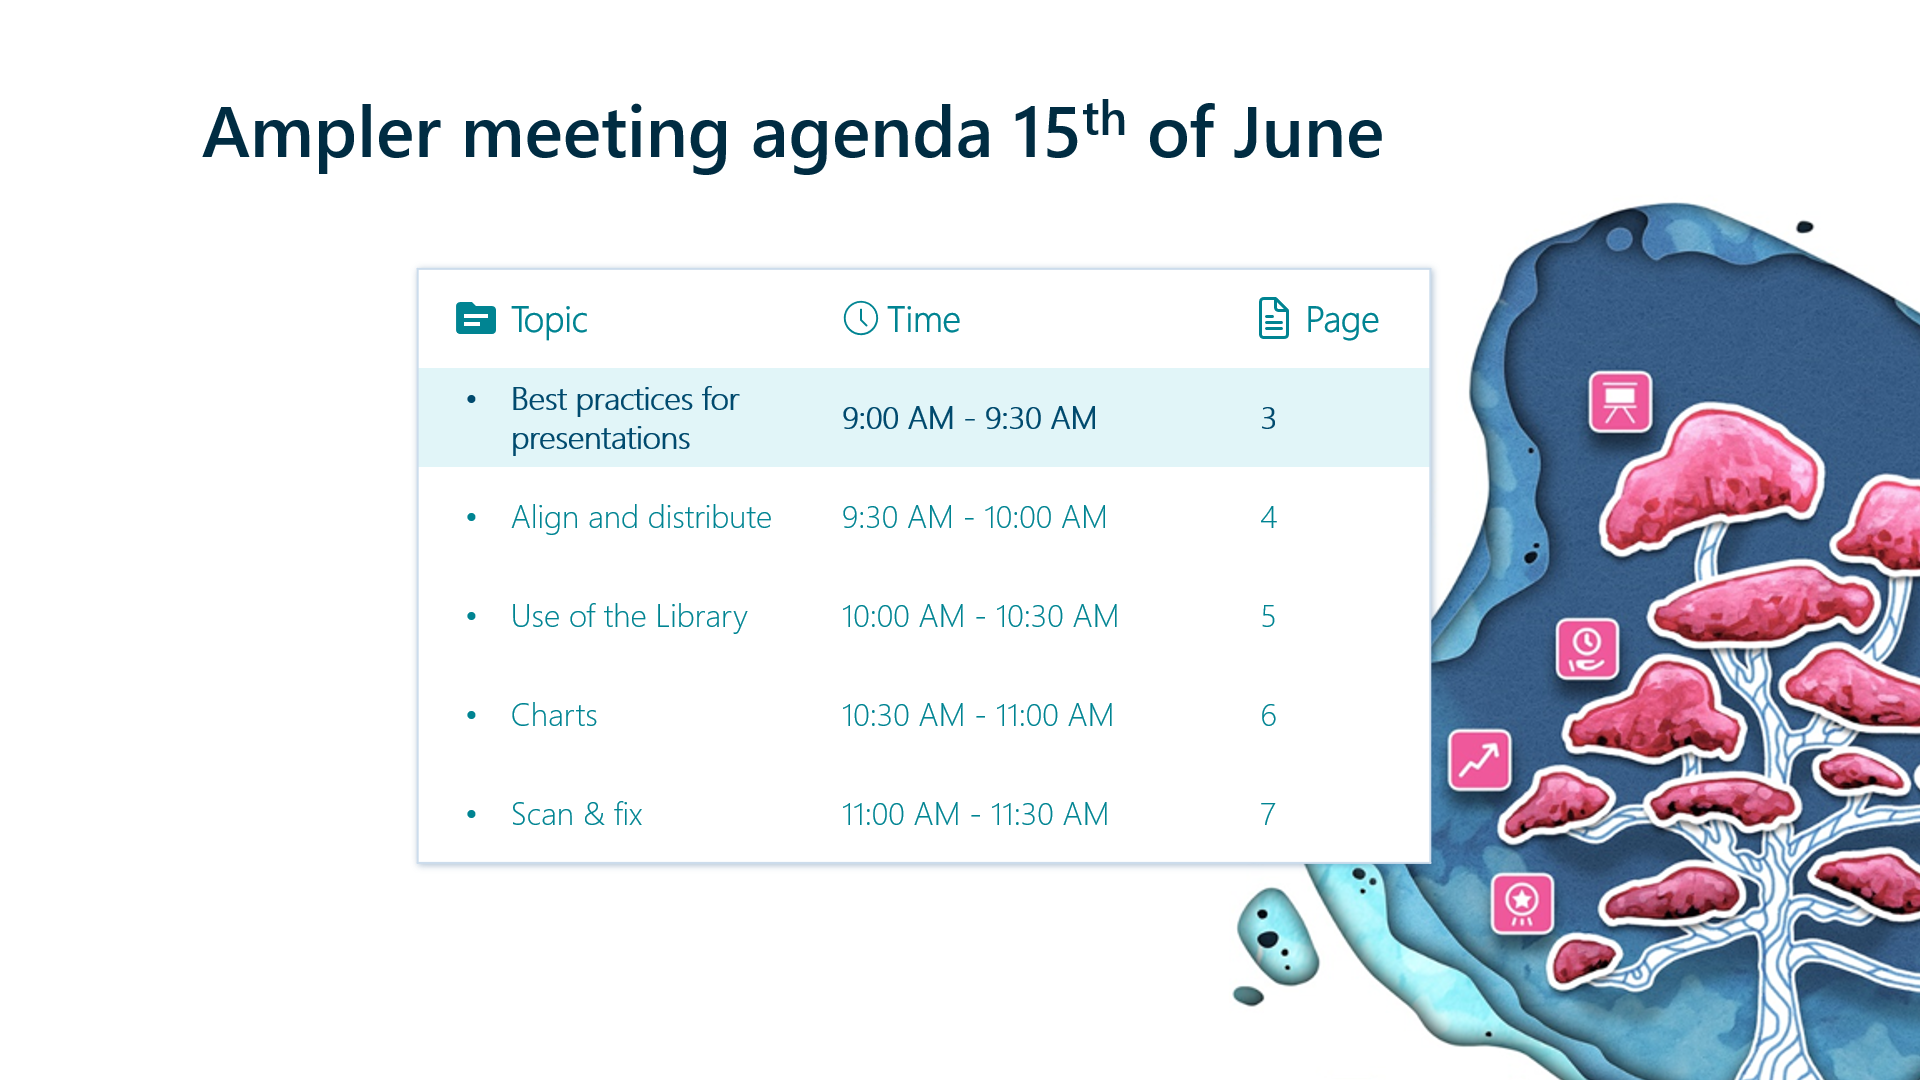 Using meeting agenda templates makes it much easier to build meeting agendas. The use of graphics or icons can lively up meeting agendas.